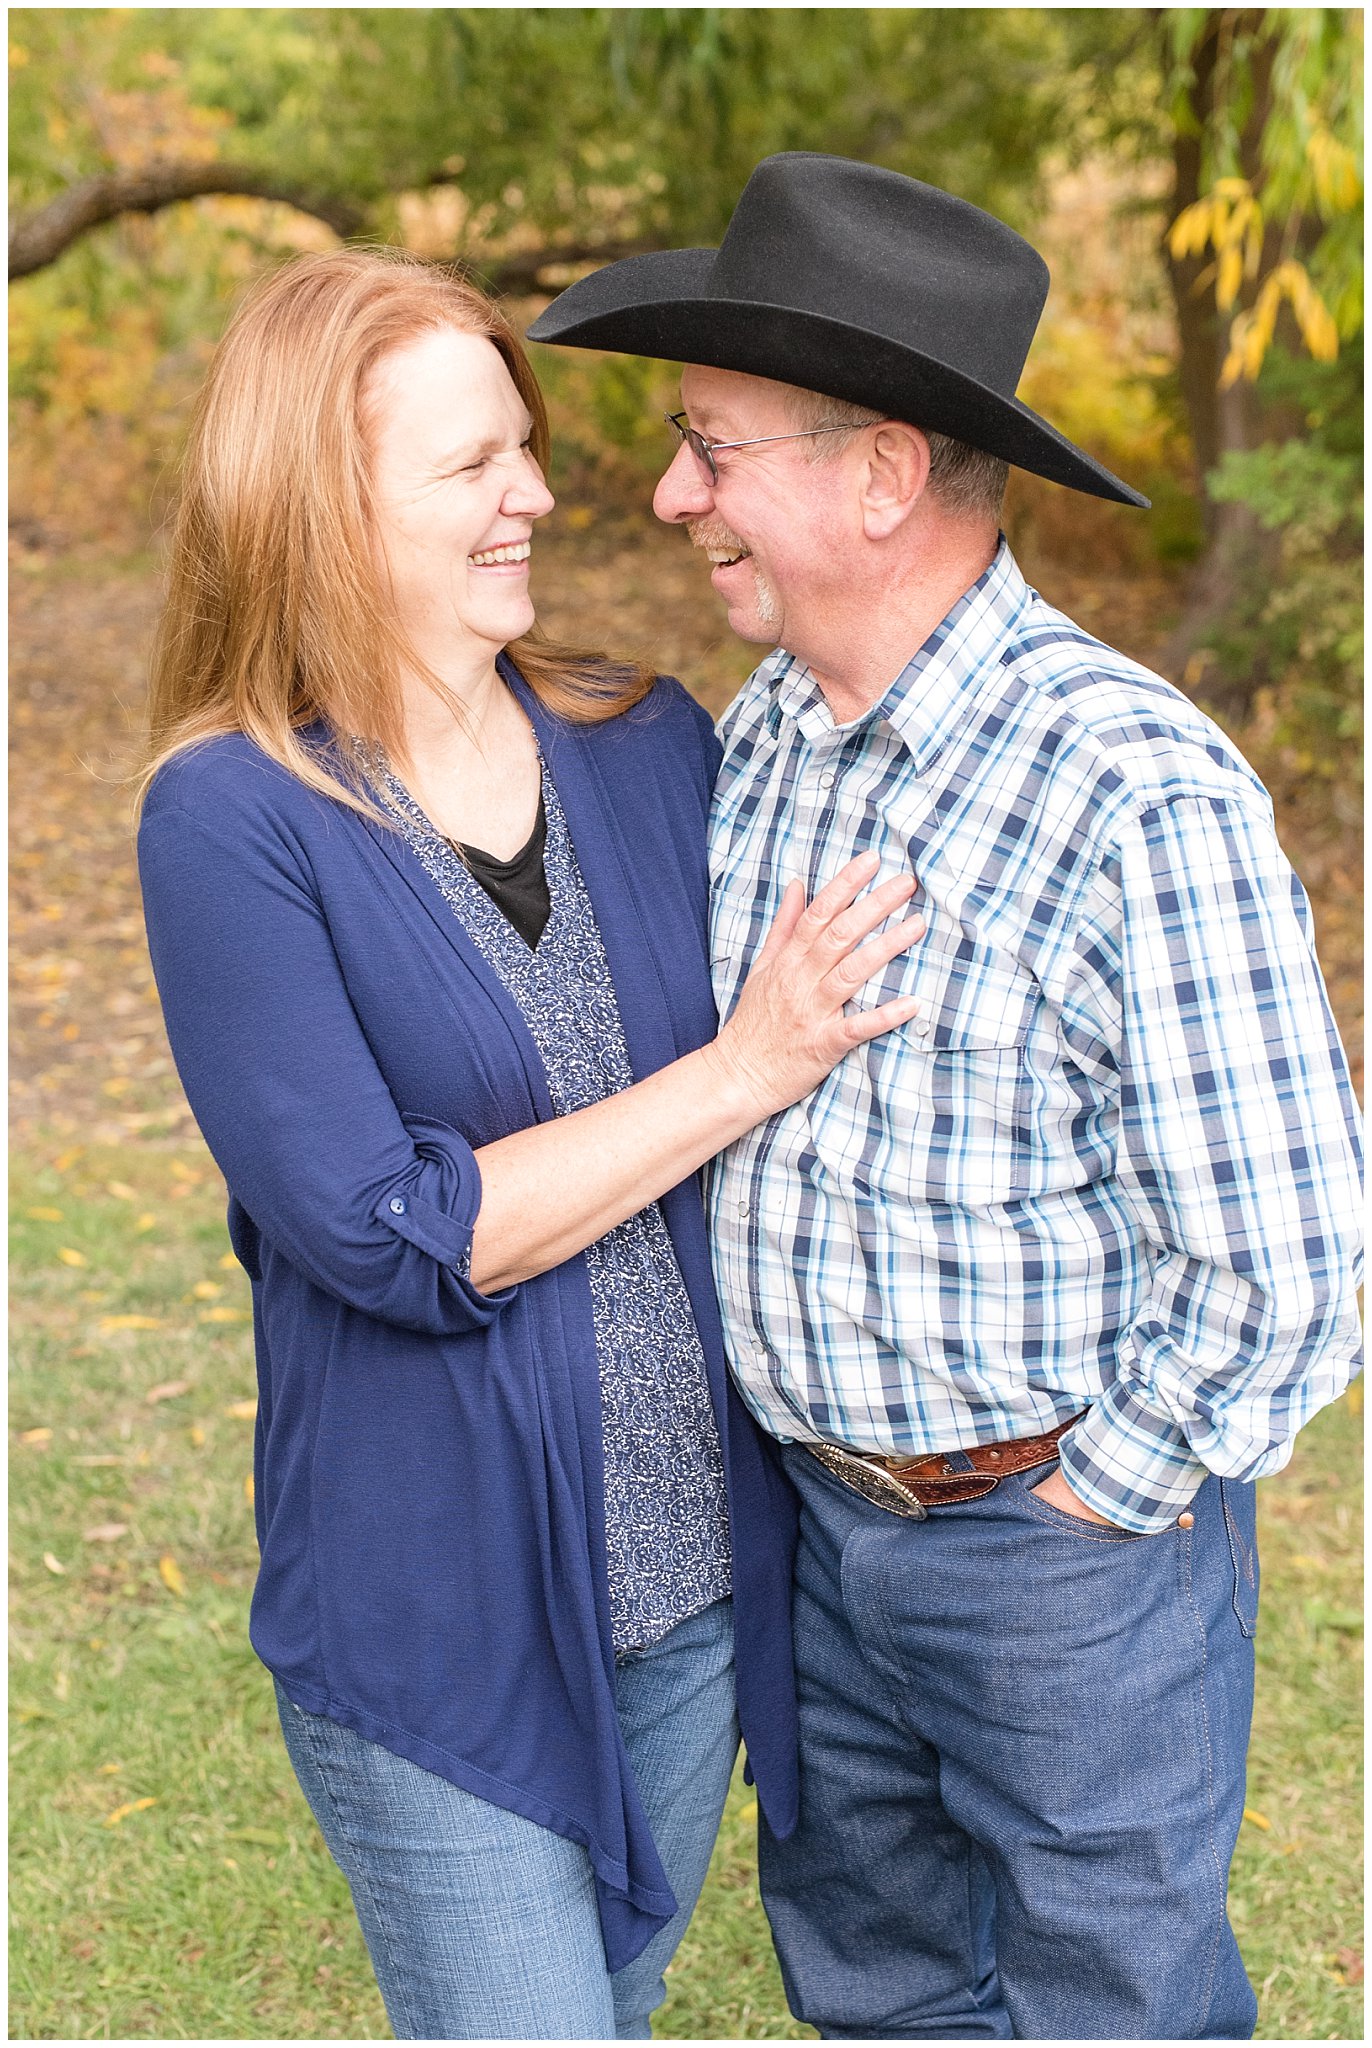 Grandparents looking at each other and laughing candid | Tremonton Family Pictures and Make a Wish Event | Jessie and Dallin Photography